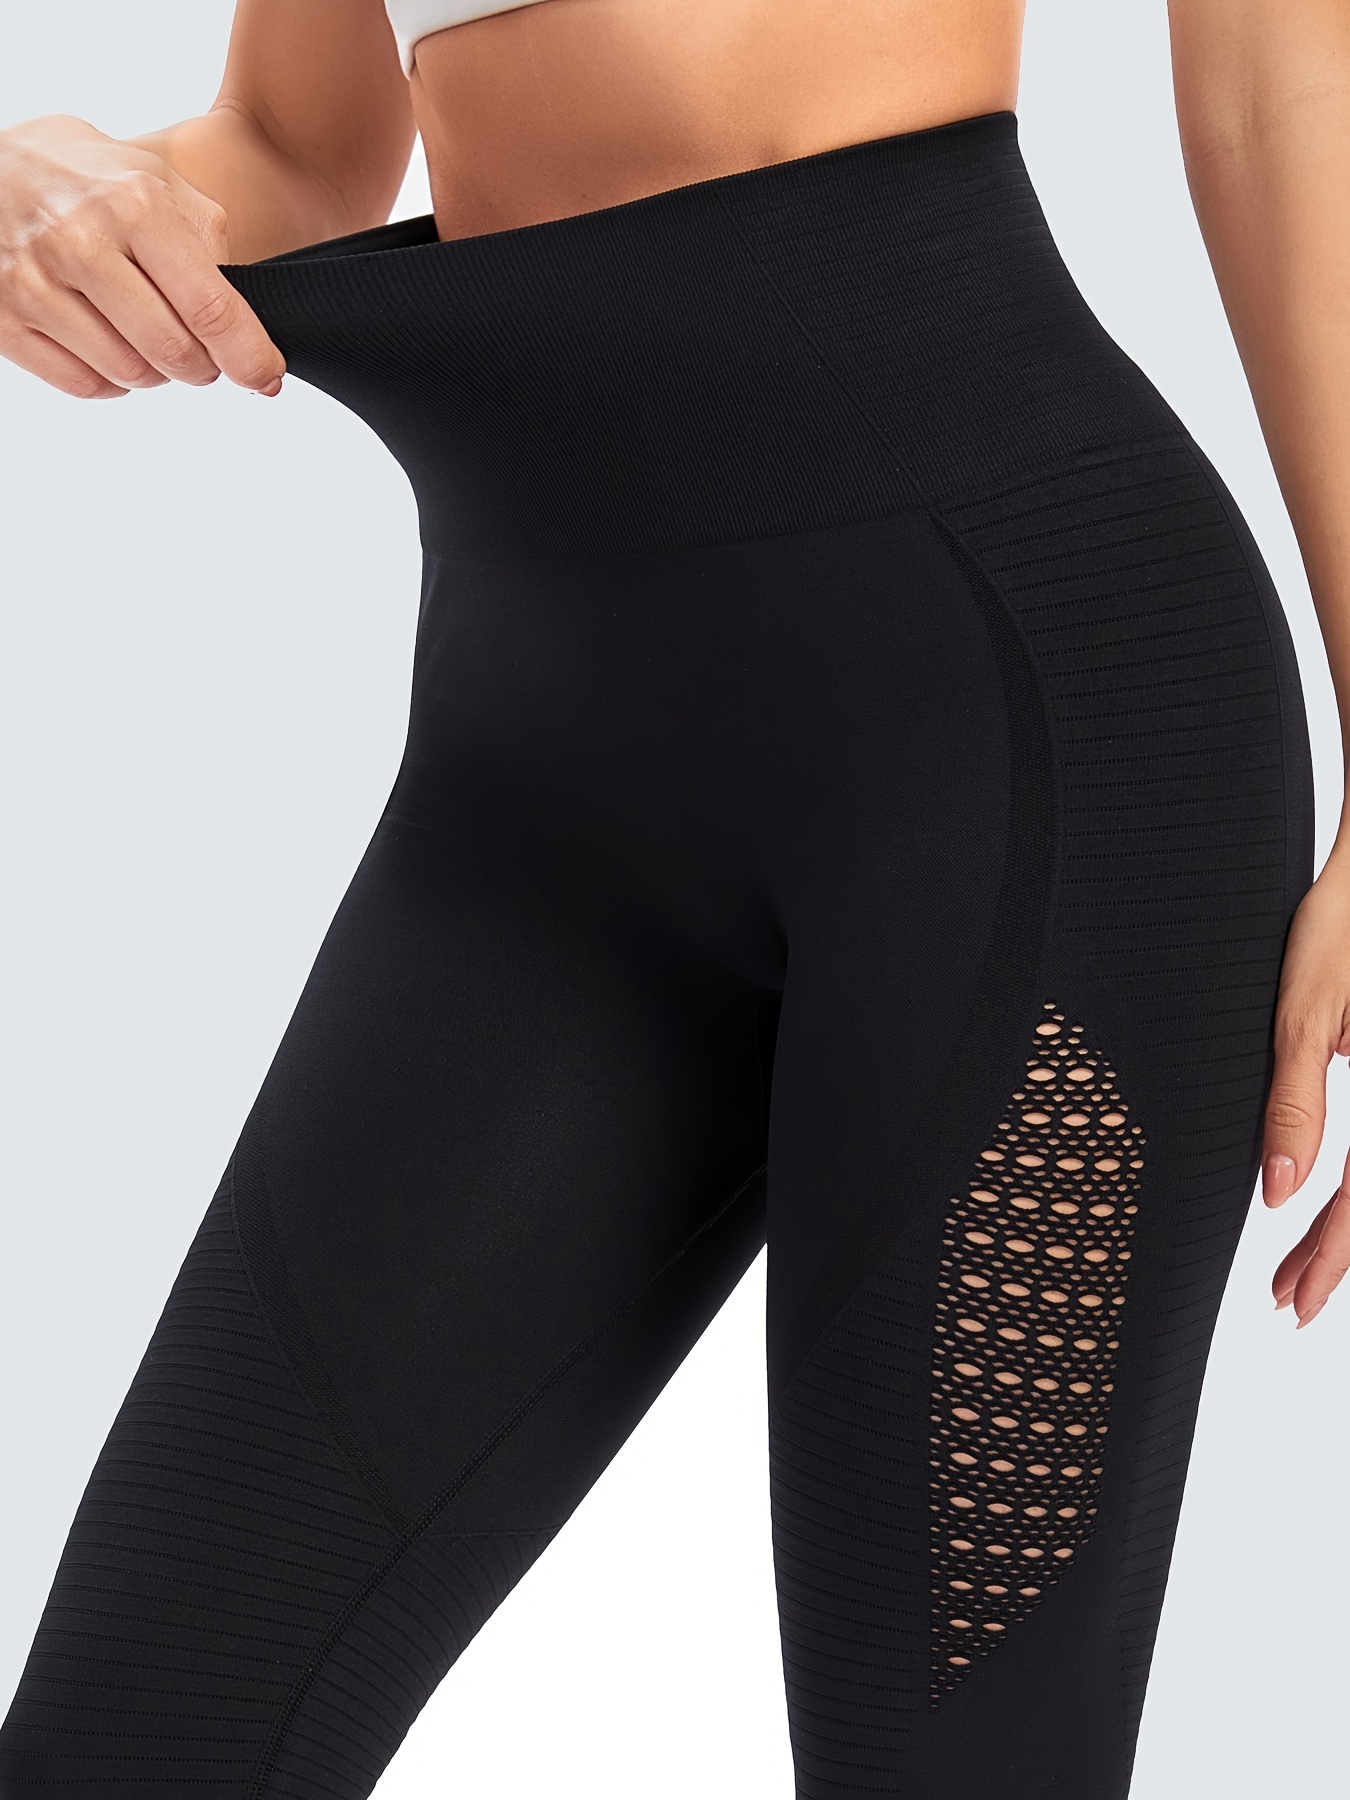  ShoSho Womens High Waist Yoga Pants Tummy Control Butt Sculpting  Leggings Athleisure Workout Compression Tights W/Side Pockets & Reflective  Mesh Panels Black Small : Clothing, Shoes & Jewelry